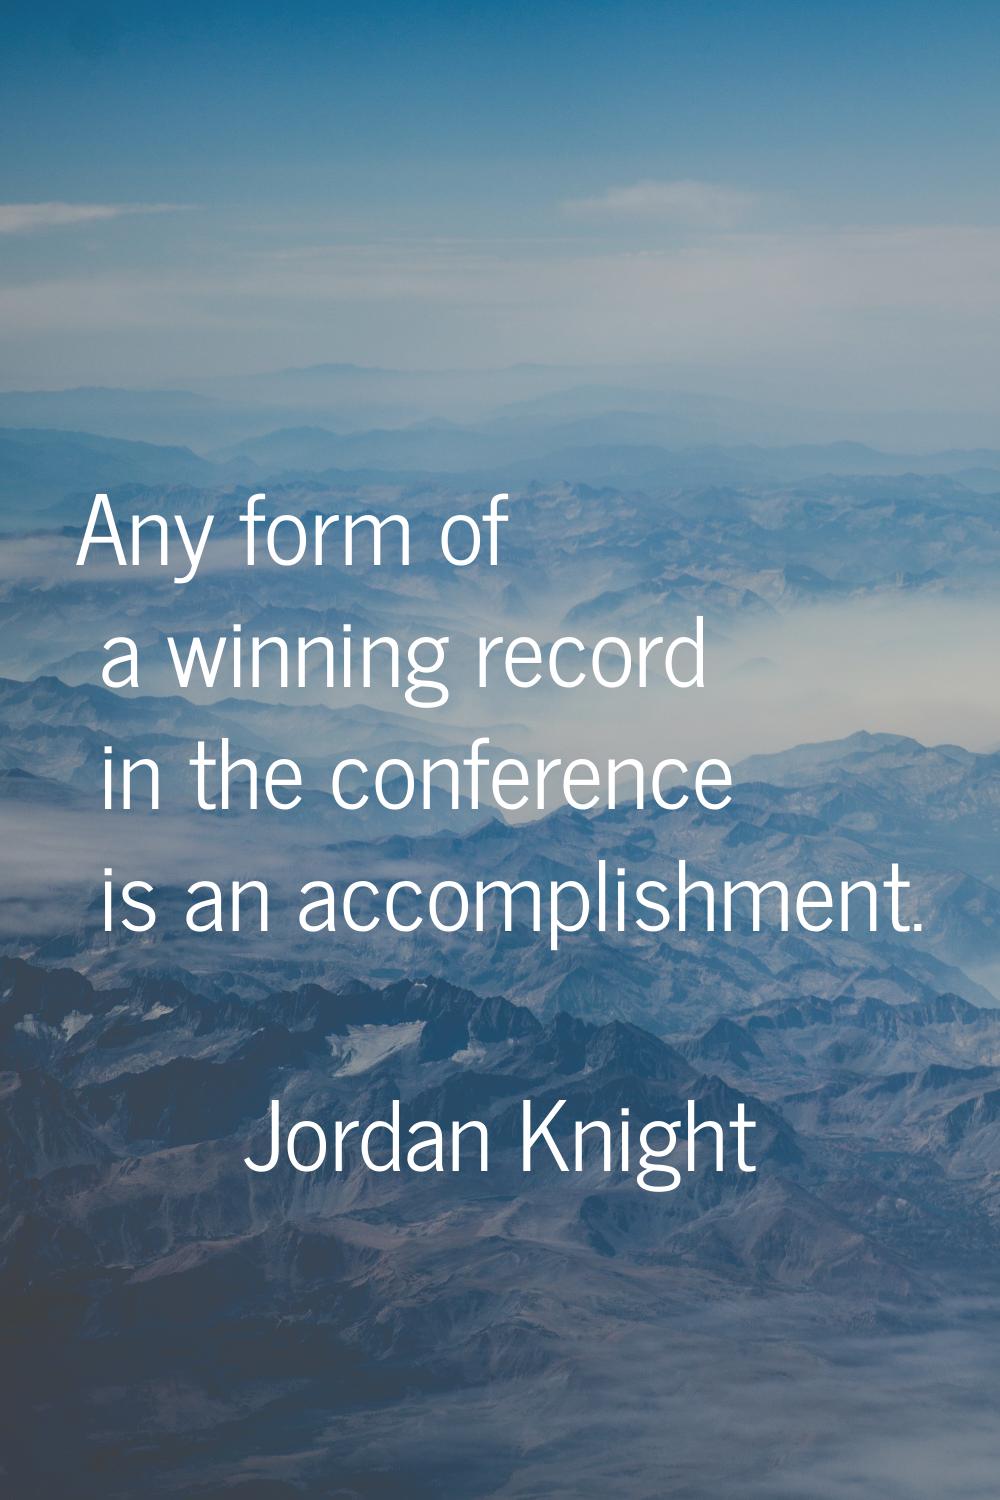 Any form of a winning record in the conference is an accomplishment.